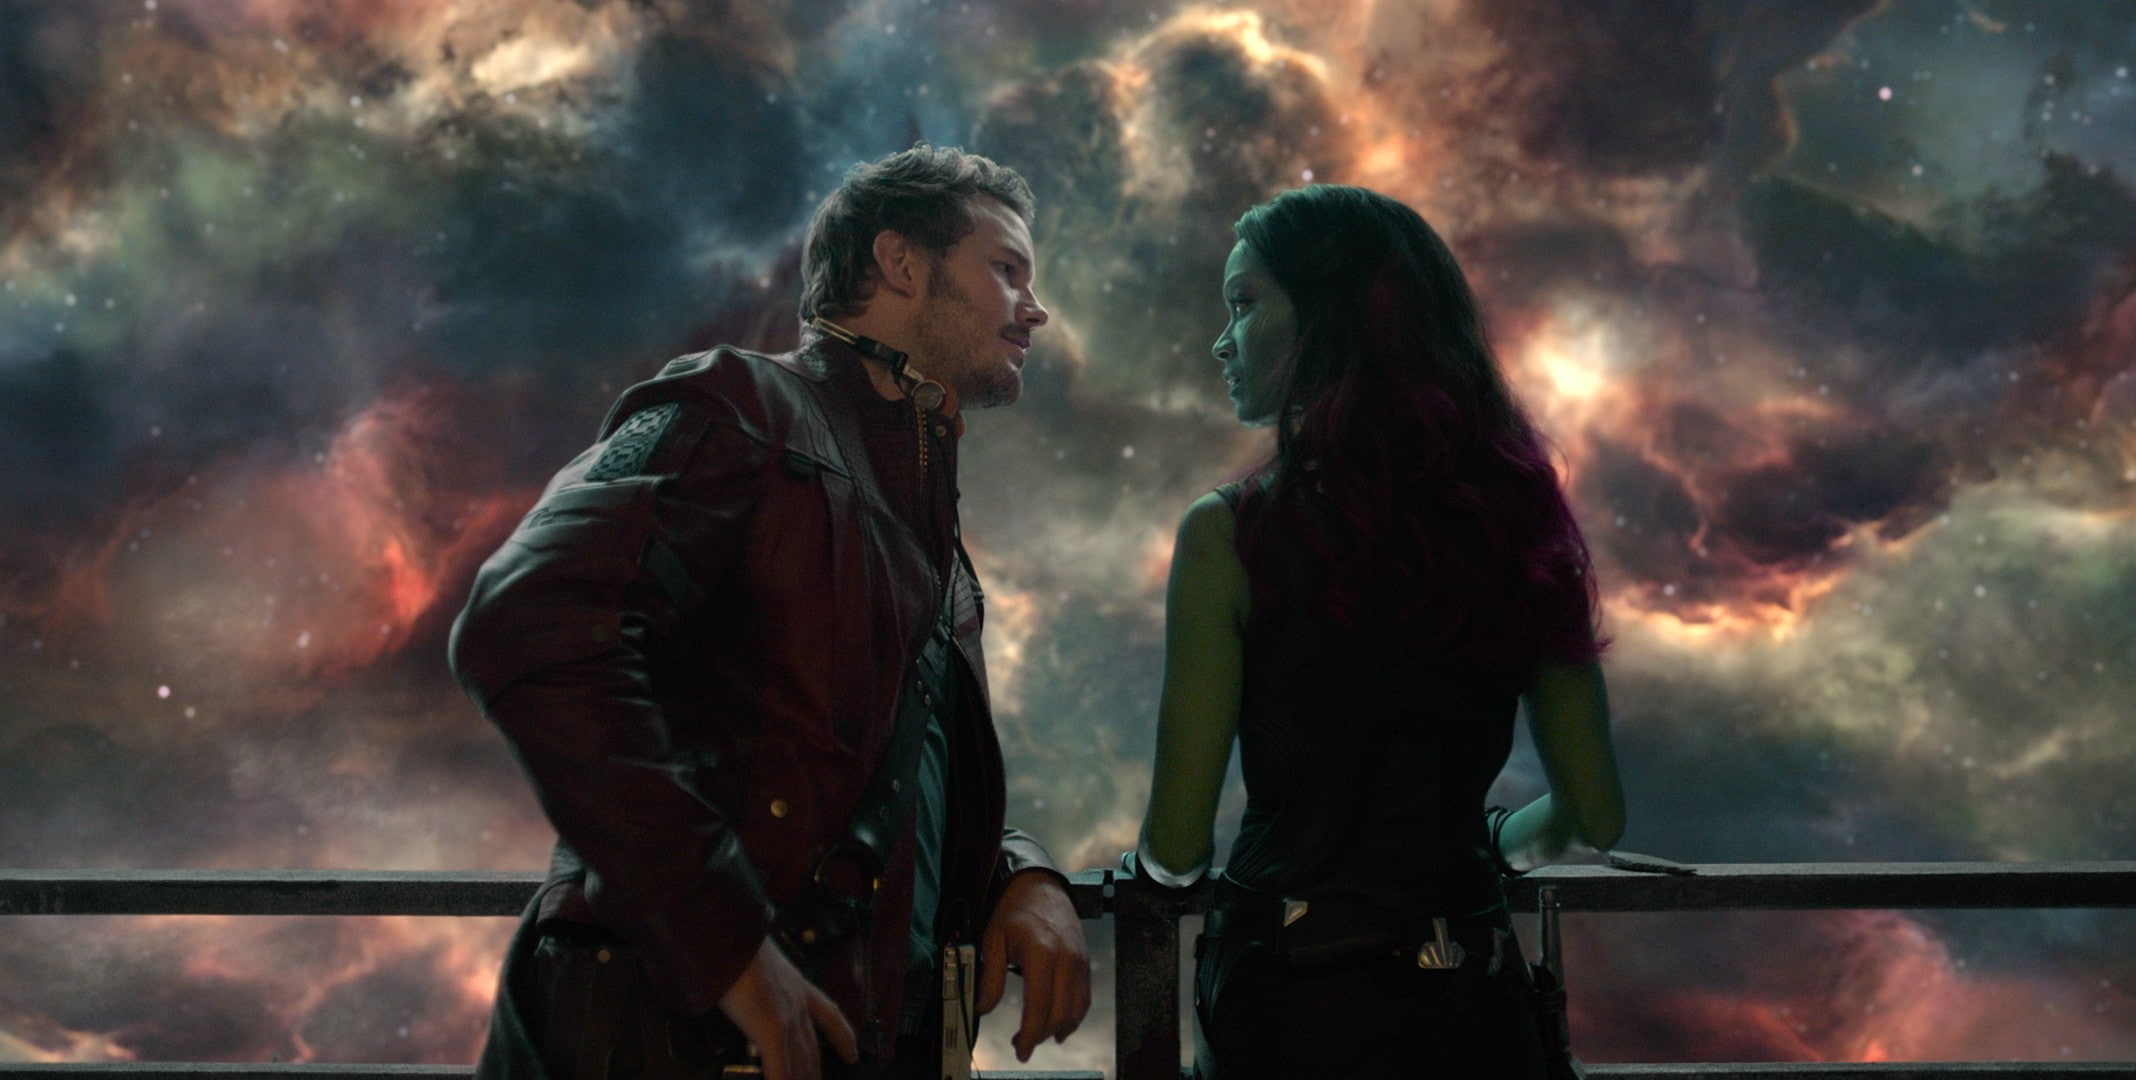 Gamora, Guardians Of The Galaxy, Star Lord, two people, smoke - physical structure